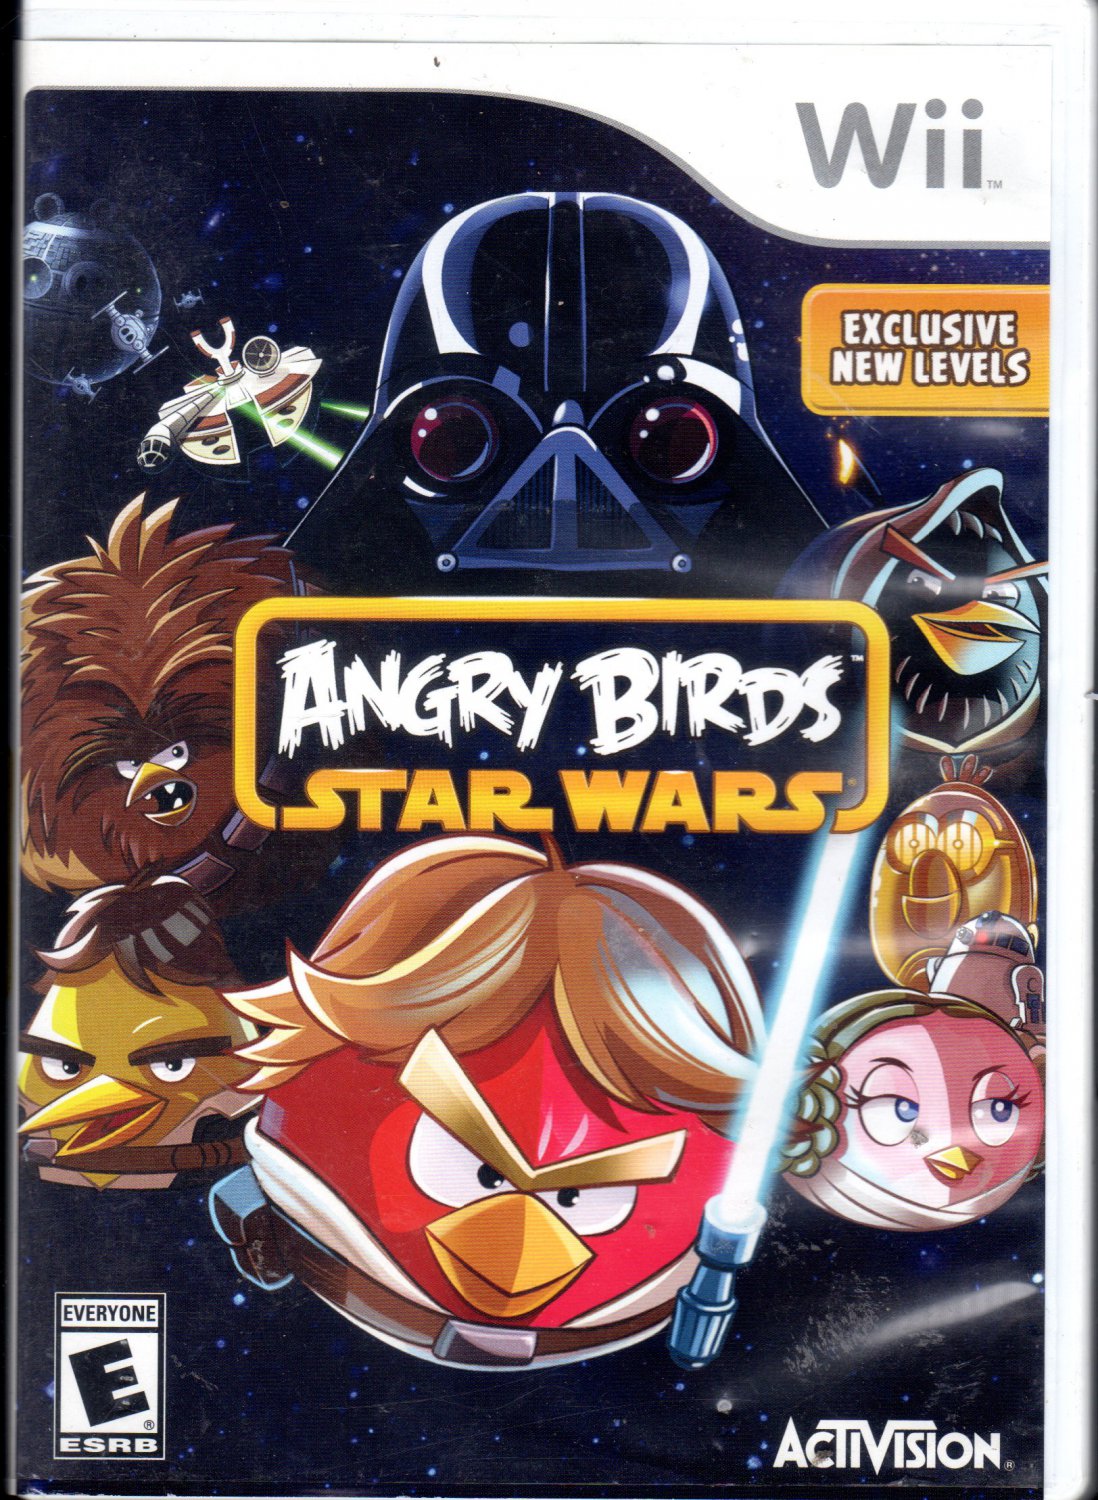 Angry Birds Star Wars Wi Game ( No Manuel)